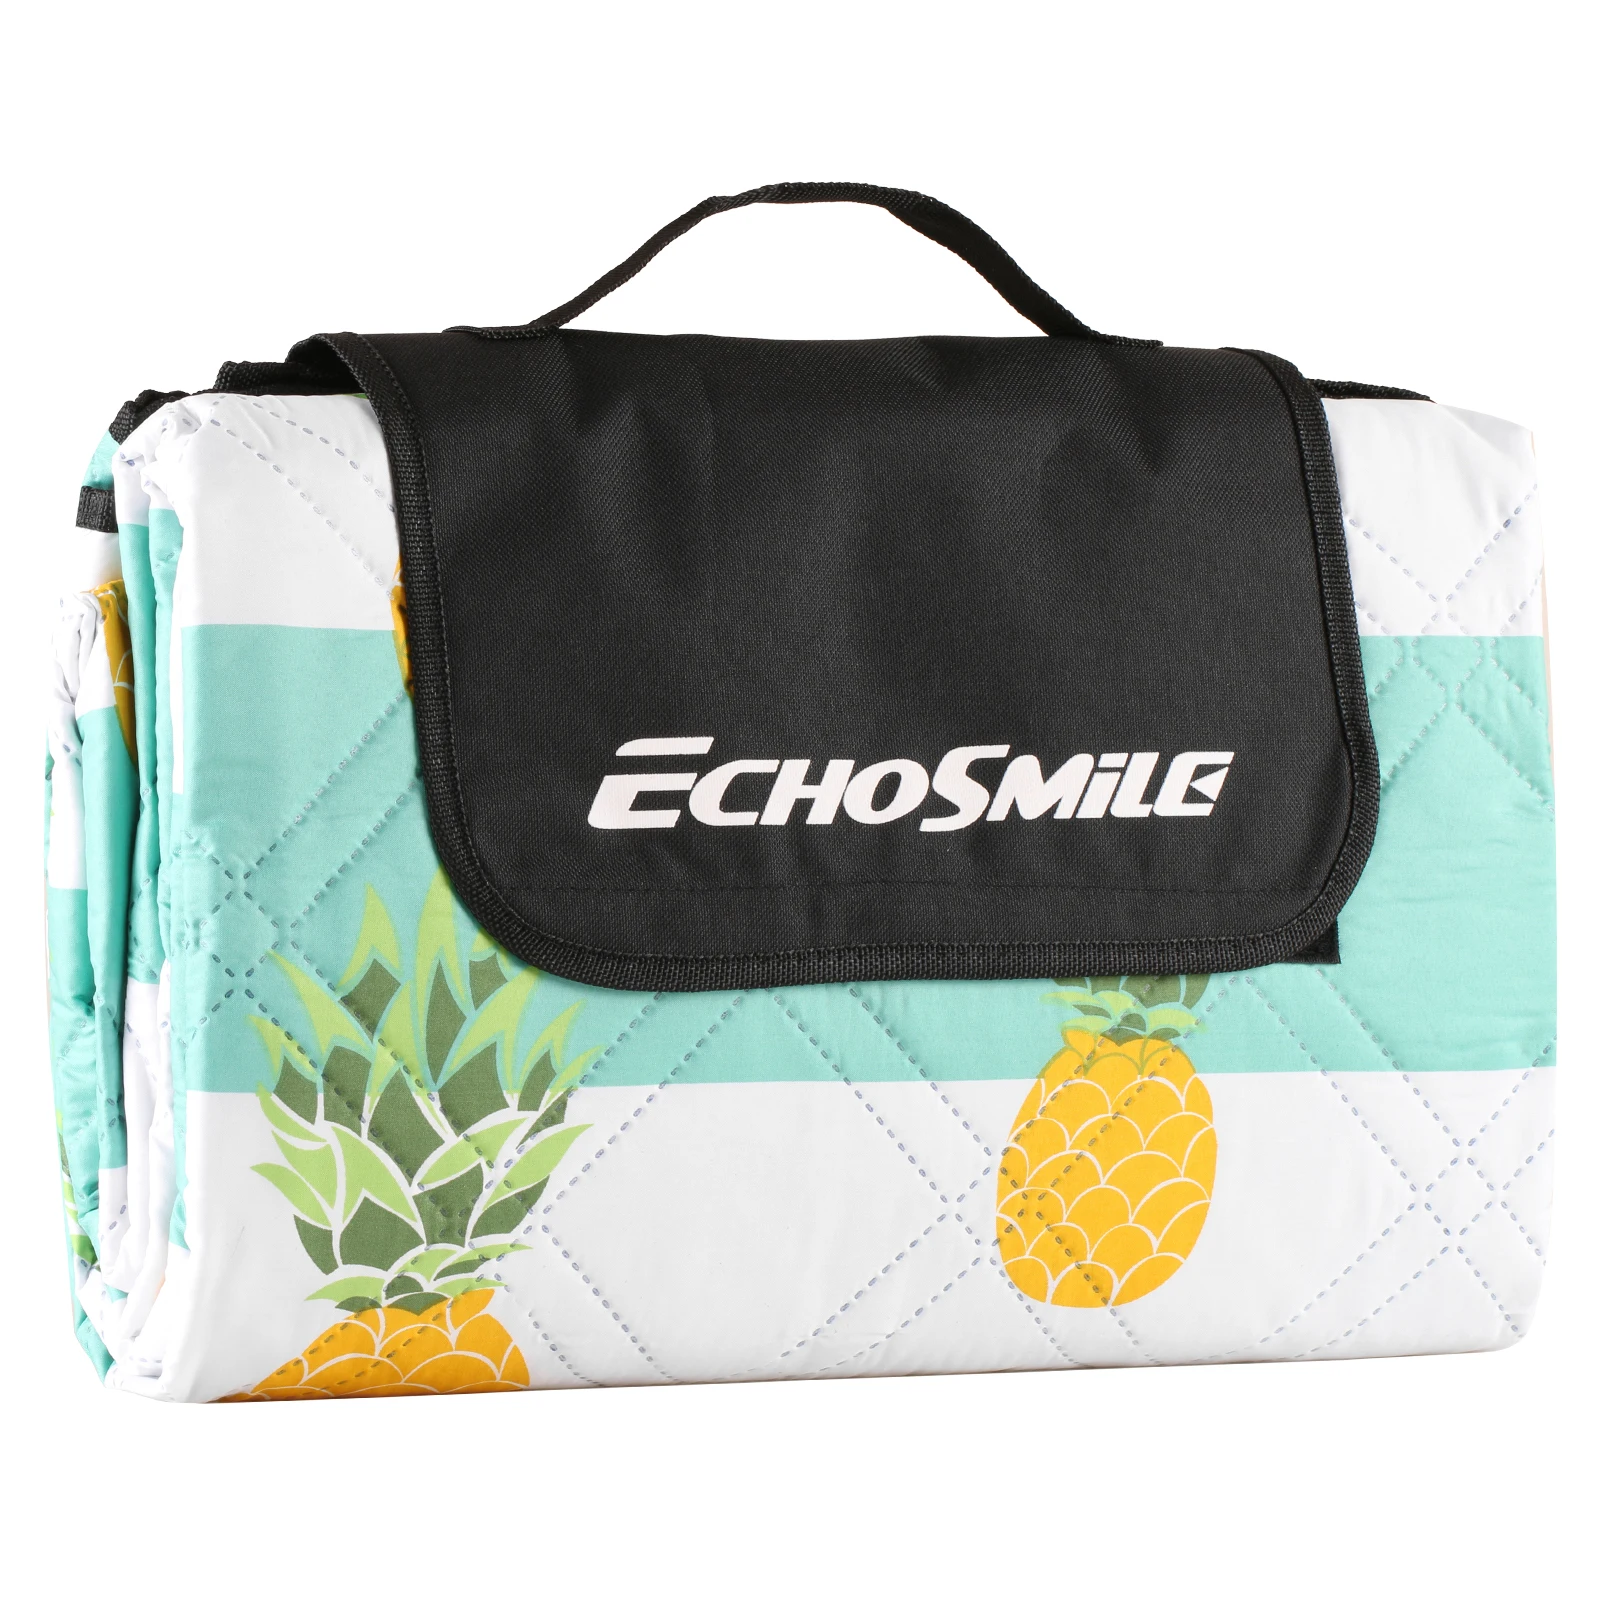 

EchoSmile Large Picnic Blanket, 3 Layer Foldable Picnic Mat, Portable Outdoor Picnic Blankets for Beach, Camping and Hiking